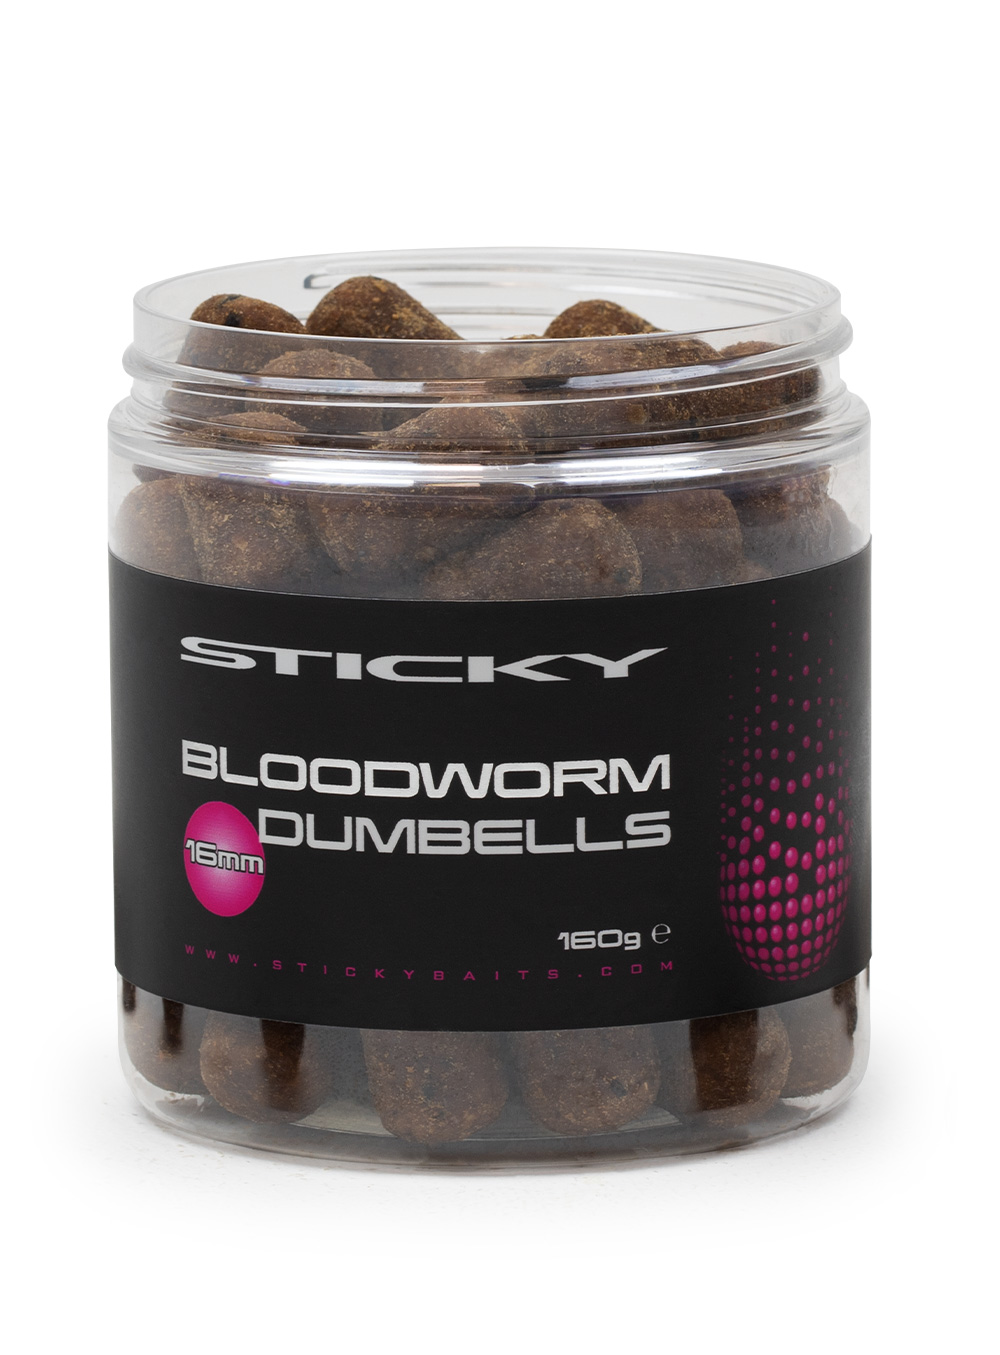 Sticky Baits Bloodworm Dumbells 160g